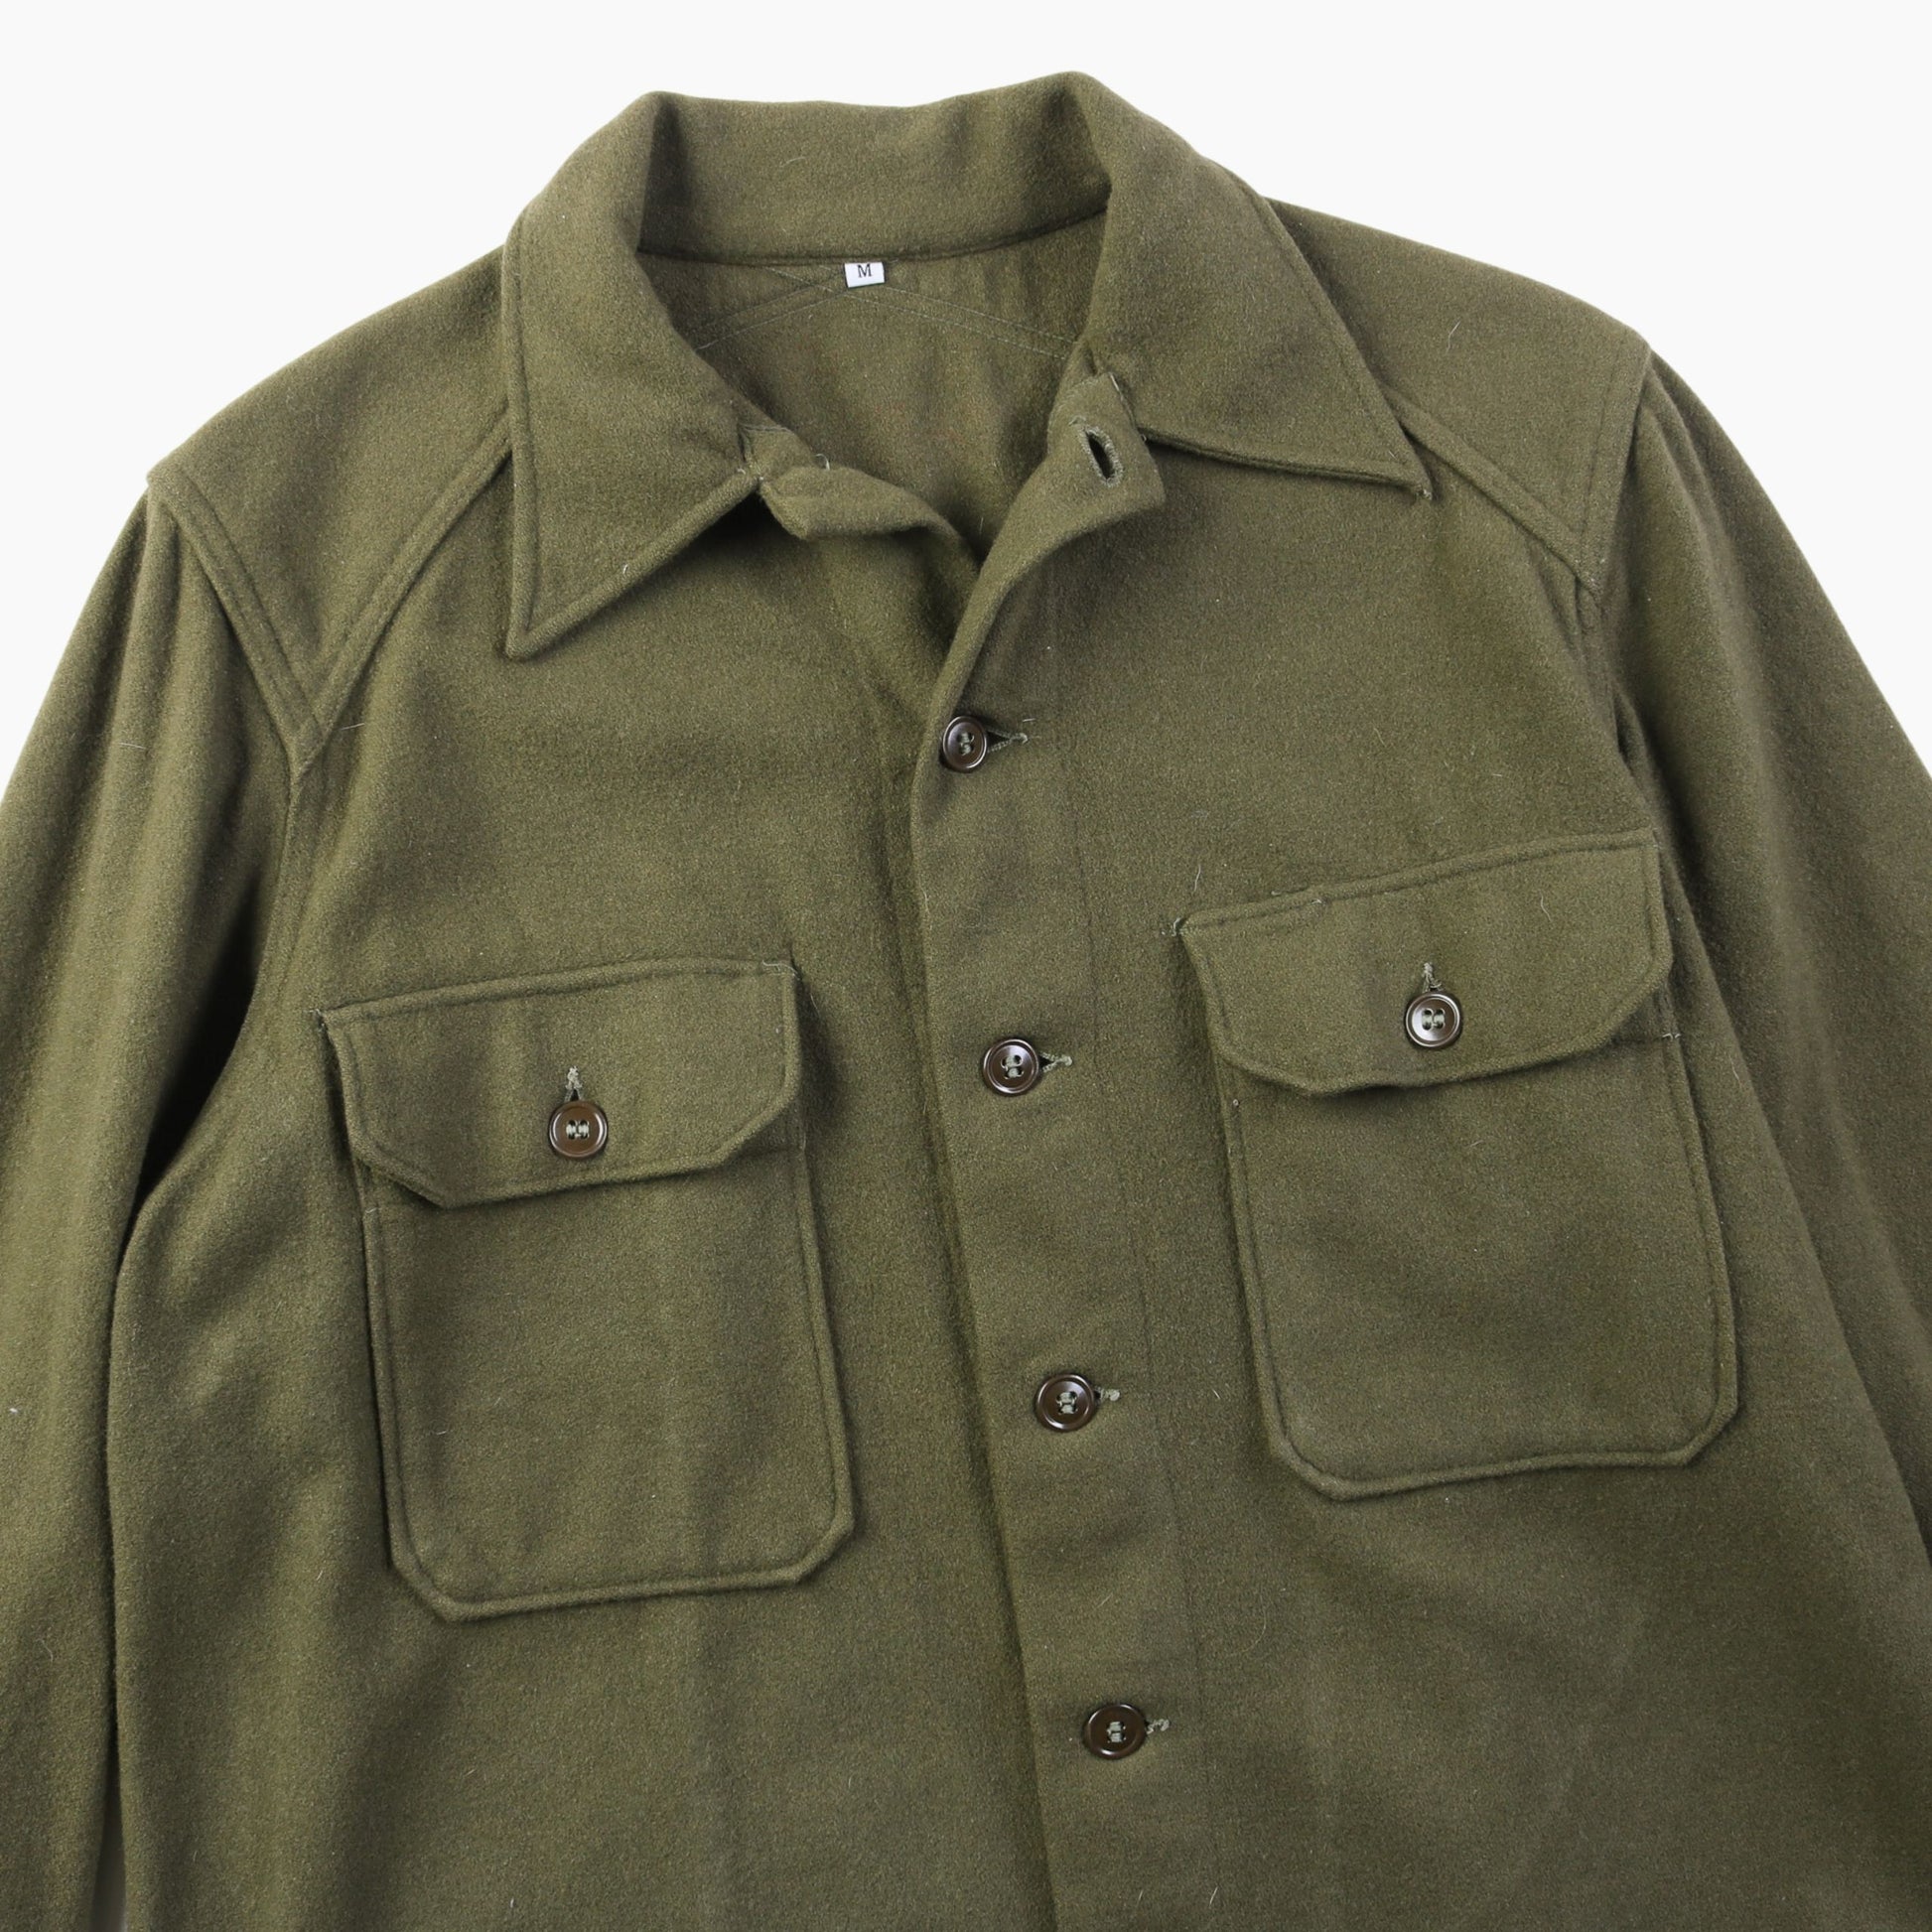 Vintage Army Cold Weather Fatigue Shirt - American Madness